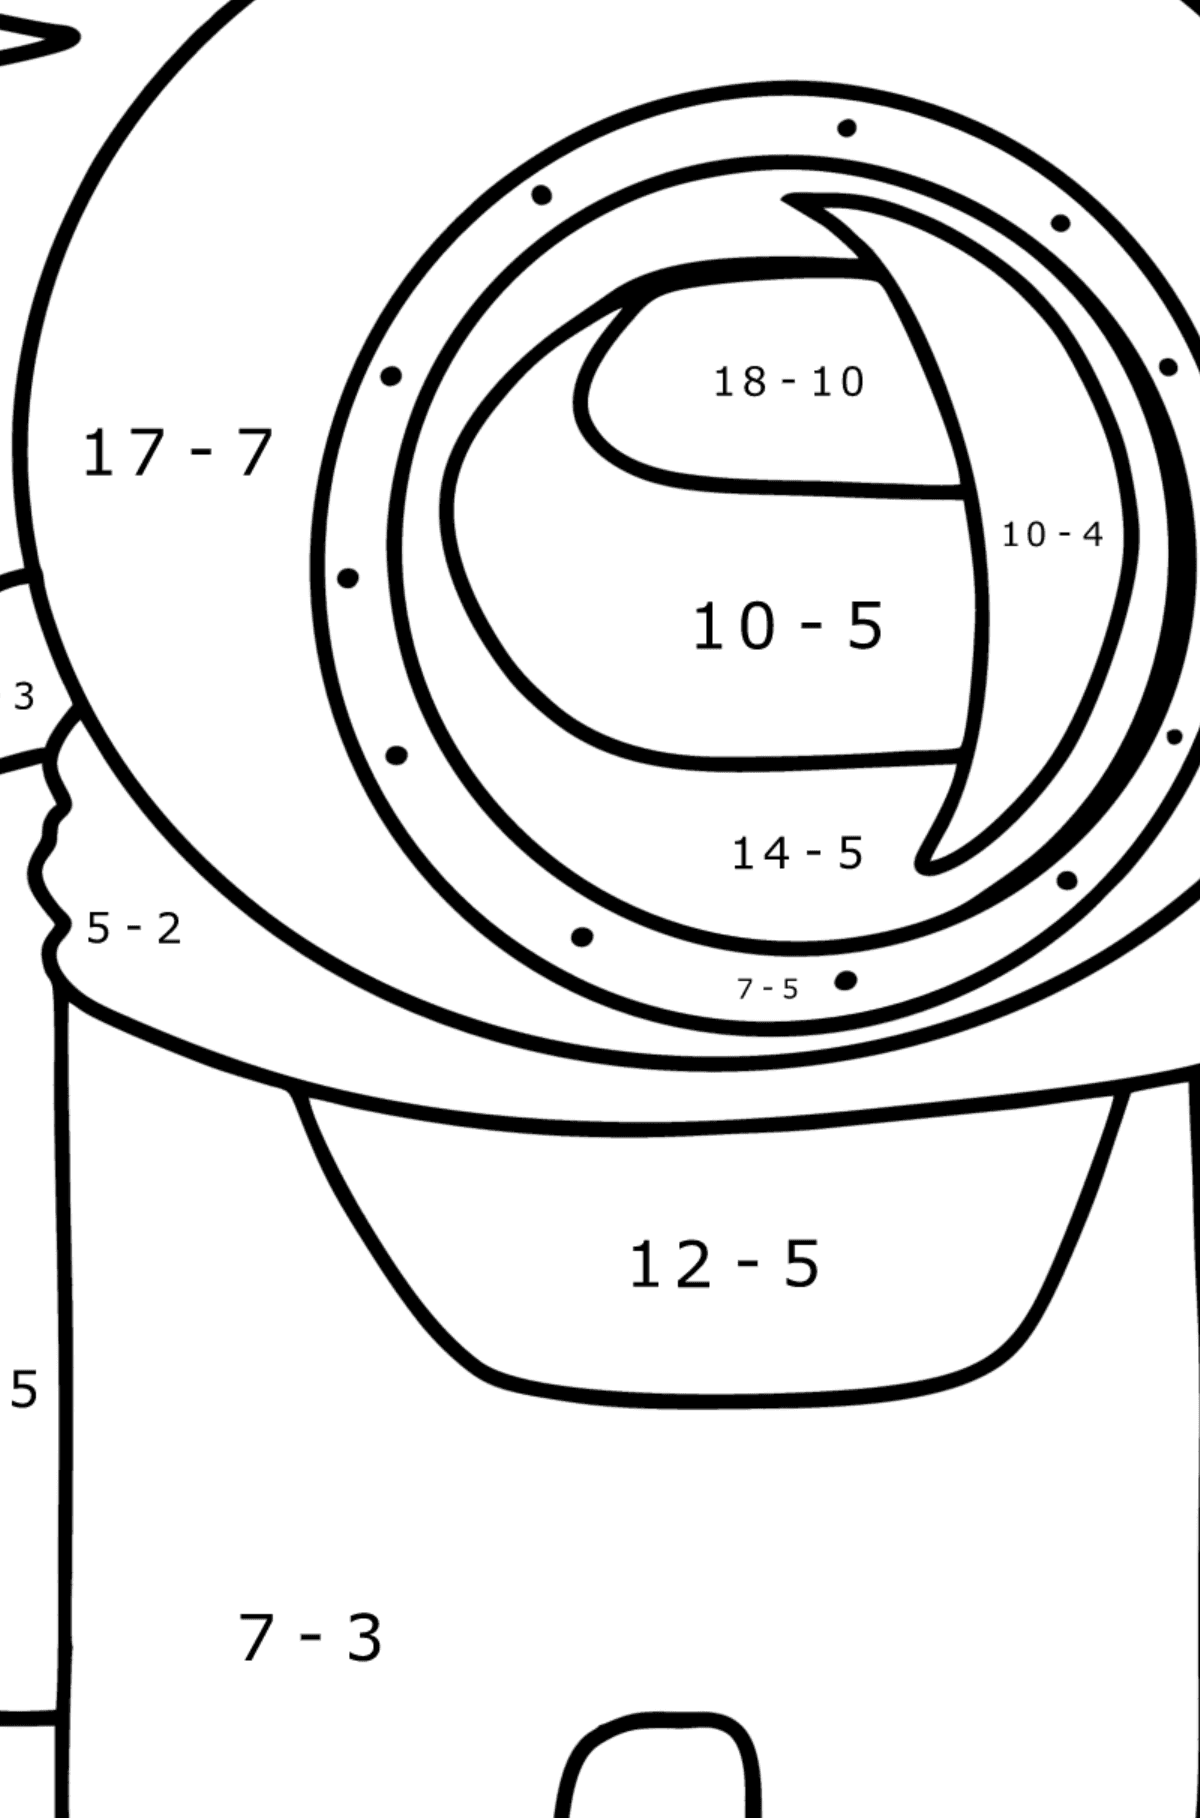 Colouring page of Among Us - Math Coloring - Subtraction for Kids